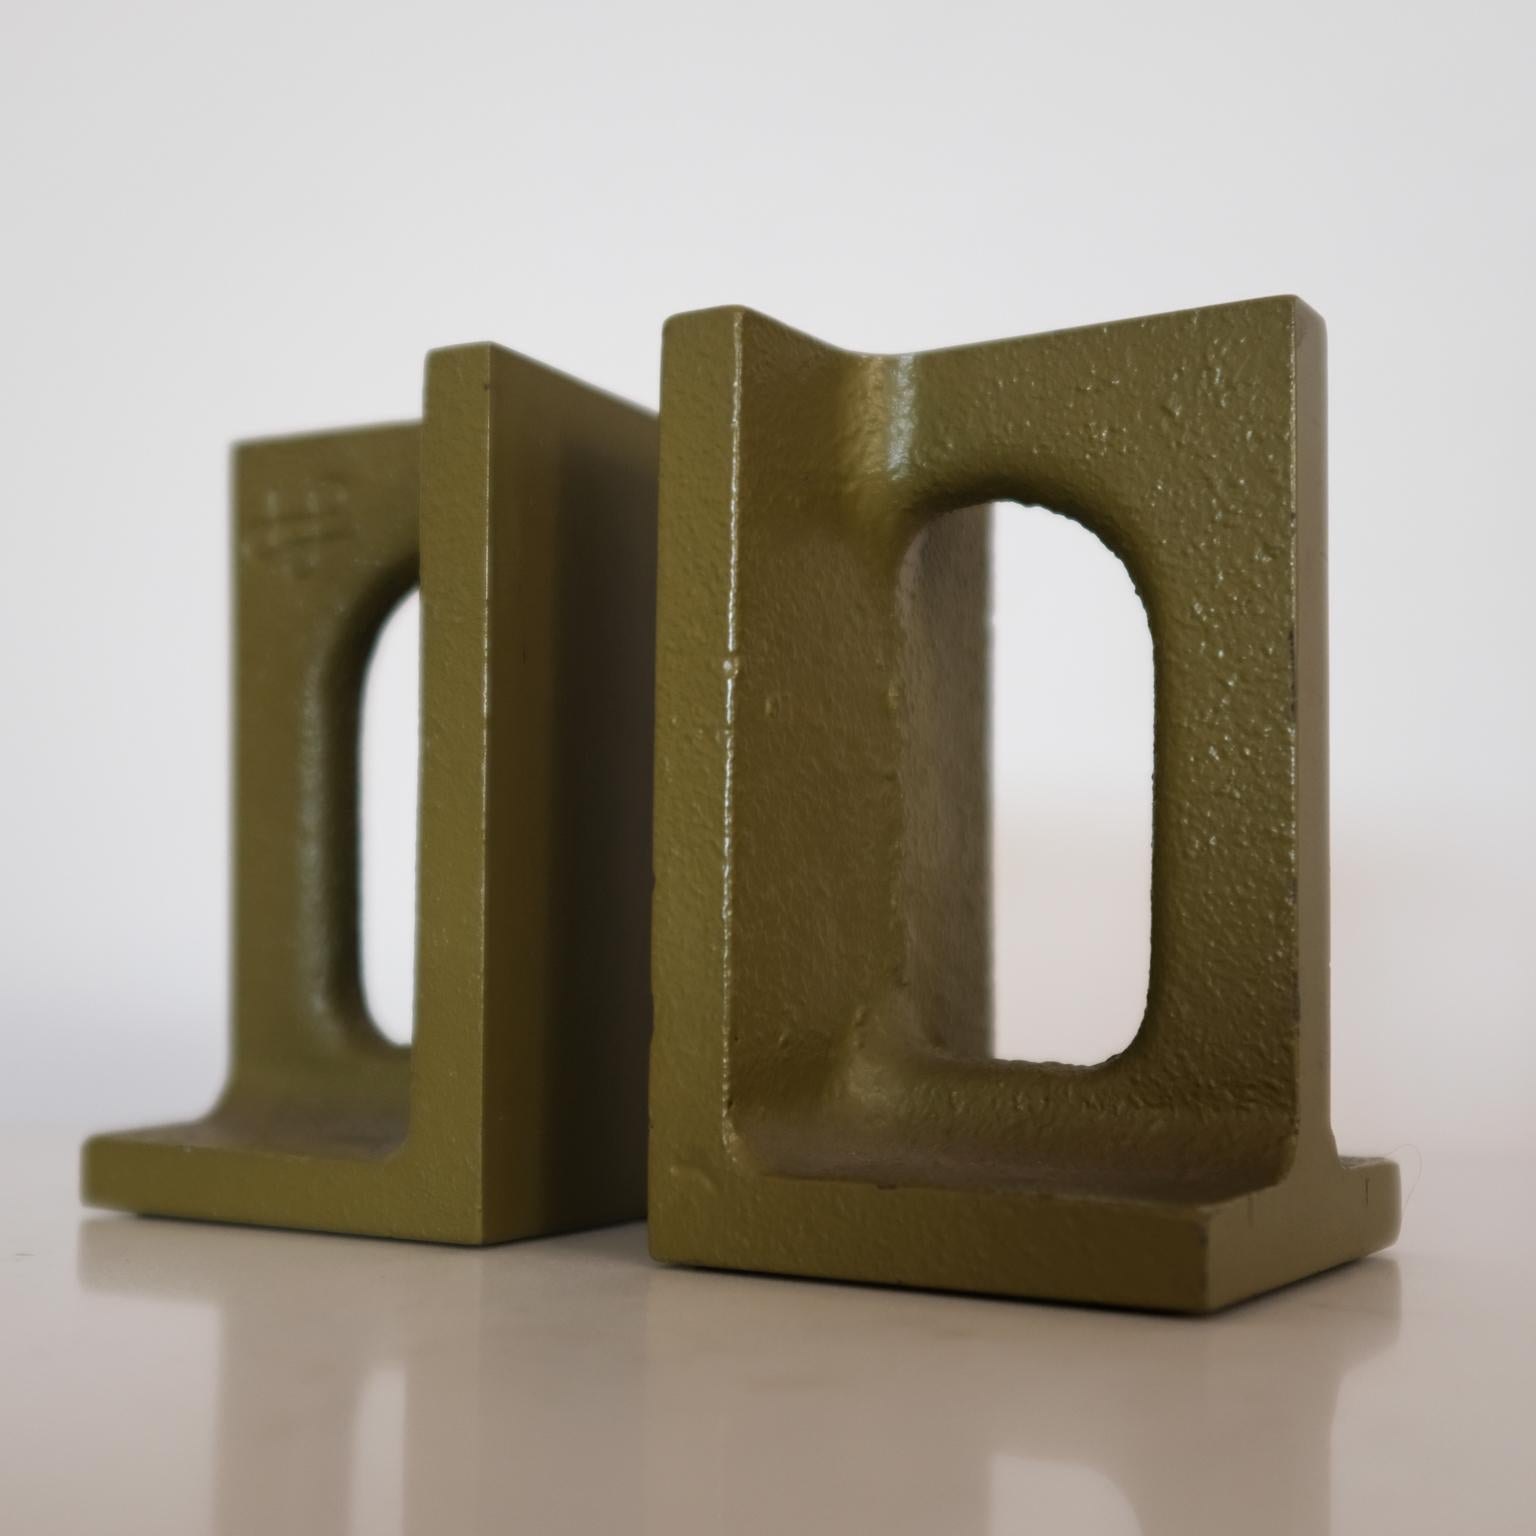 Bookends by Bill Curry for his Company, Design Line. Designed and manufactured in El Segundo, CA in the 1960s. Cast iron with green lacquer. The model is 